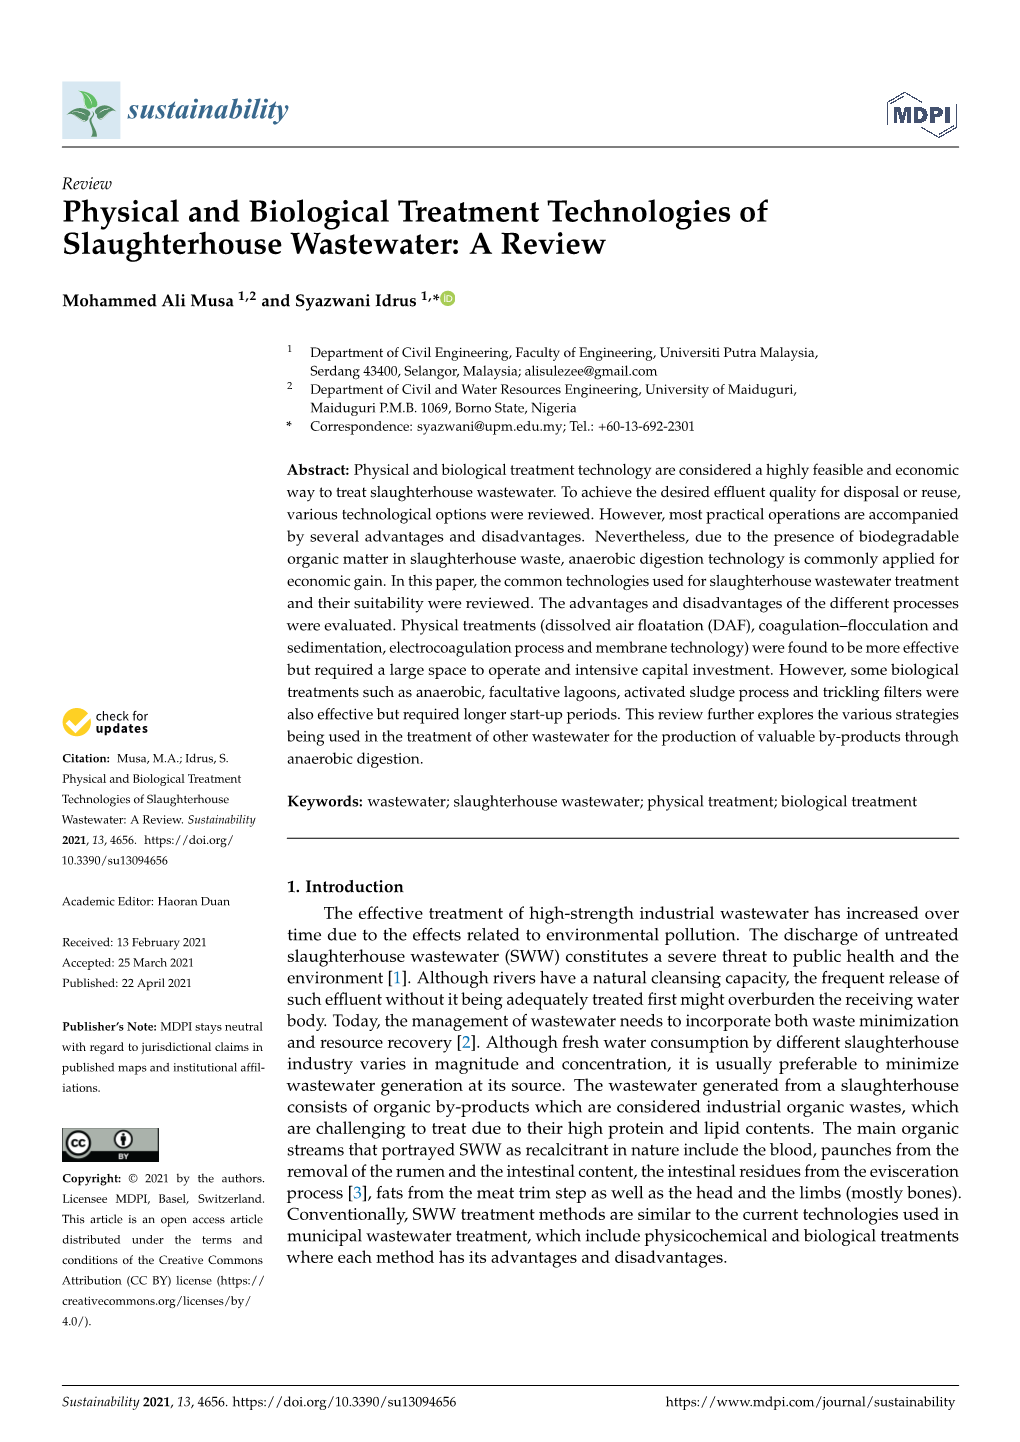 Physical and Biological Treatment Technologies of Slaughterhouse Wastewater: a Review